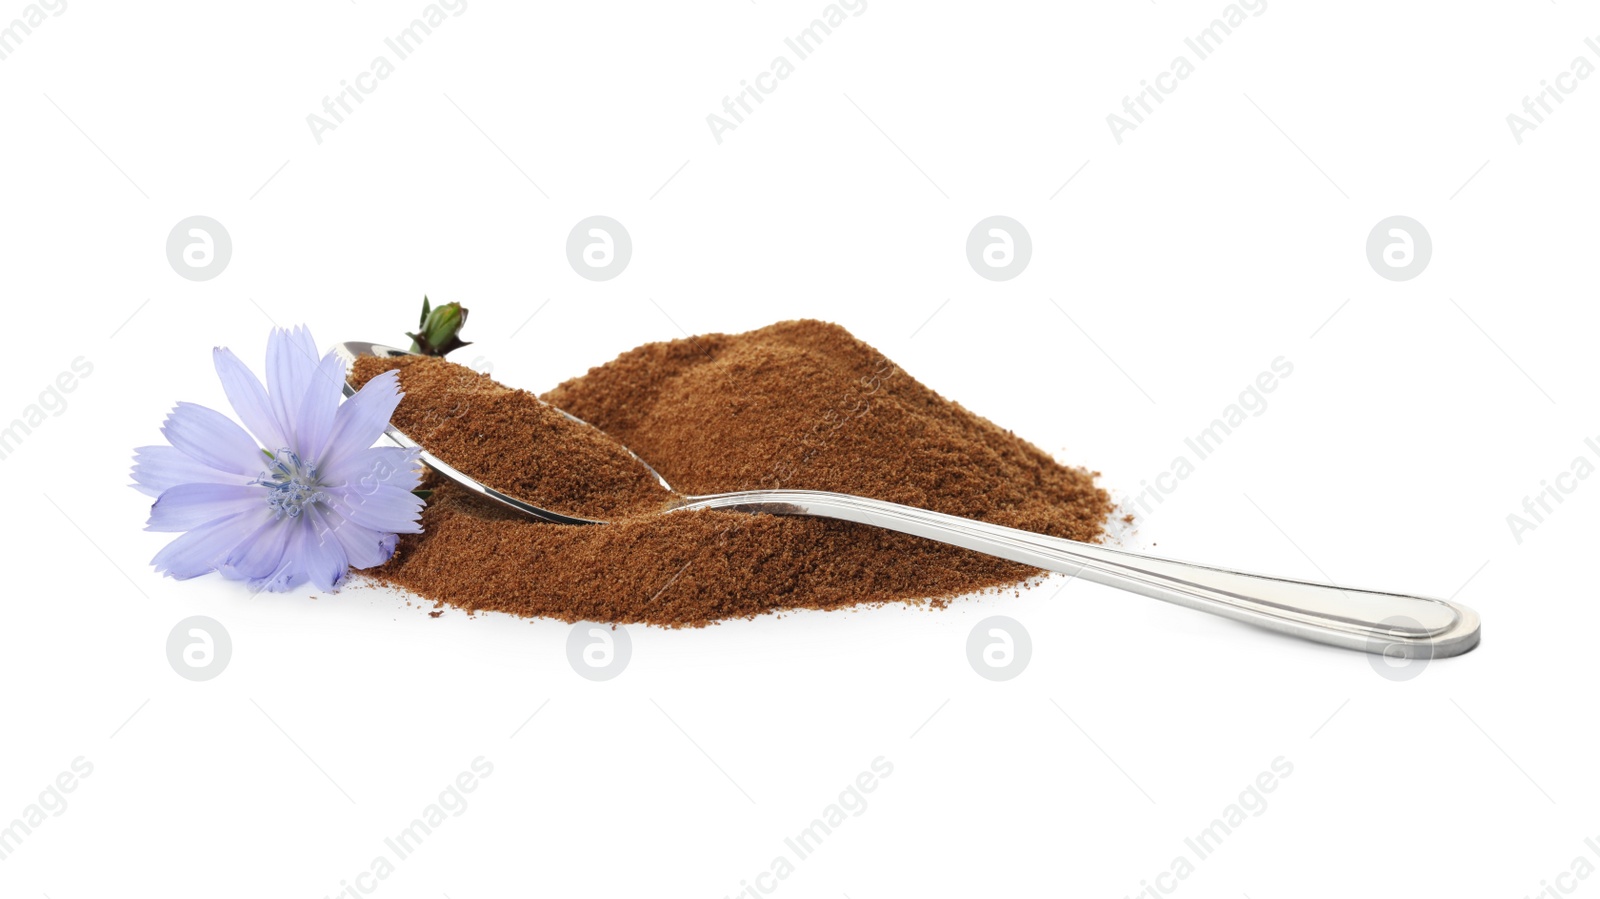 Photo of Spoon, chicory powder and flower on white background